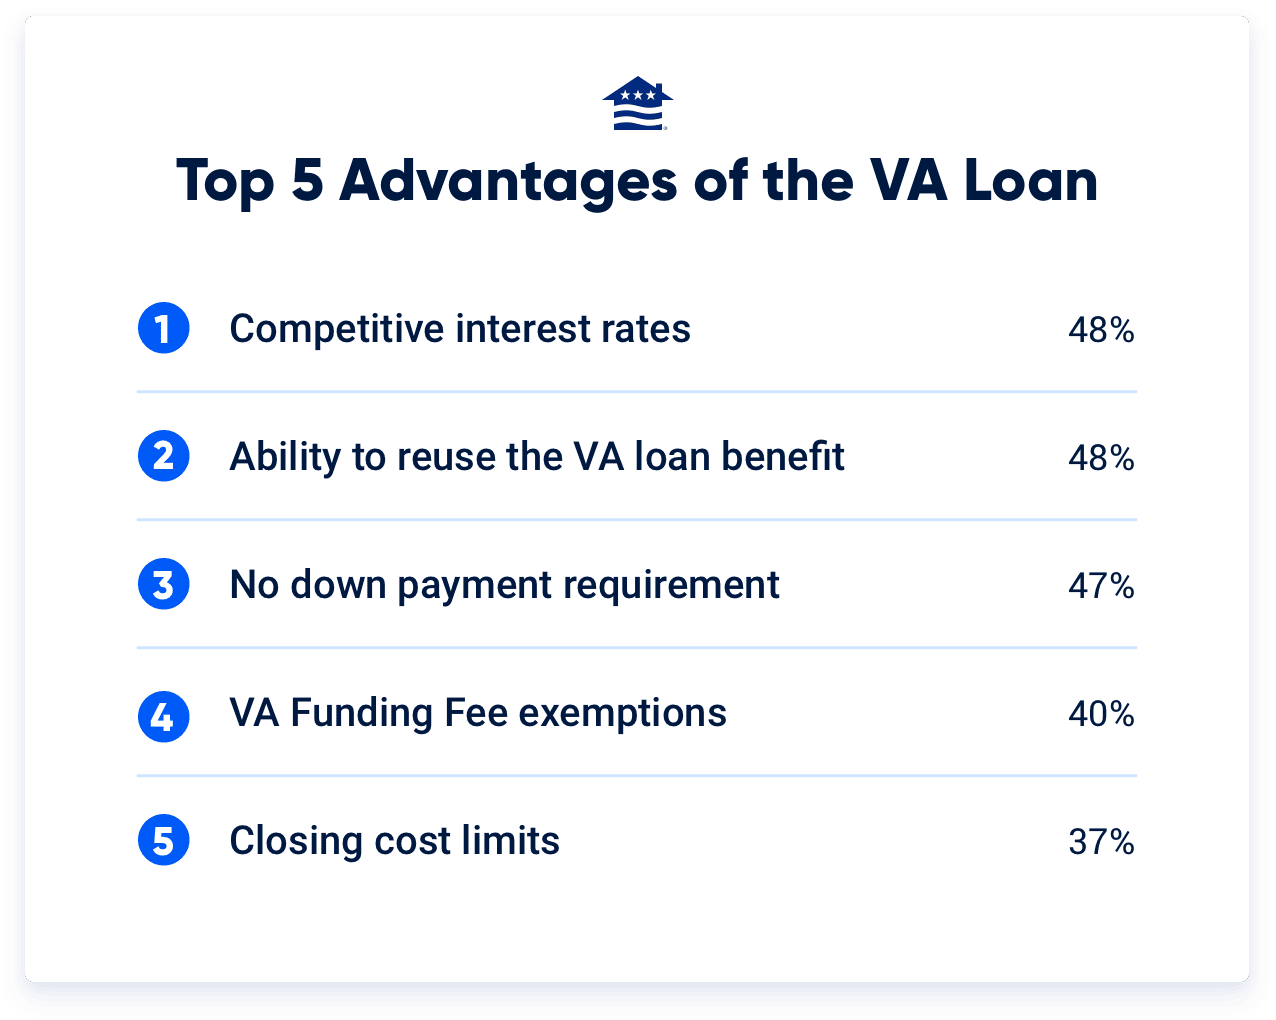 Here’s what Veterans and service members say are the top five advantages of VA loans: